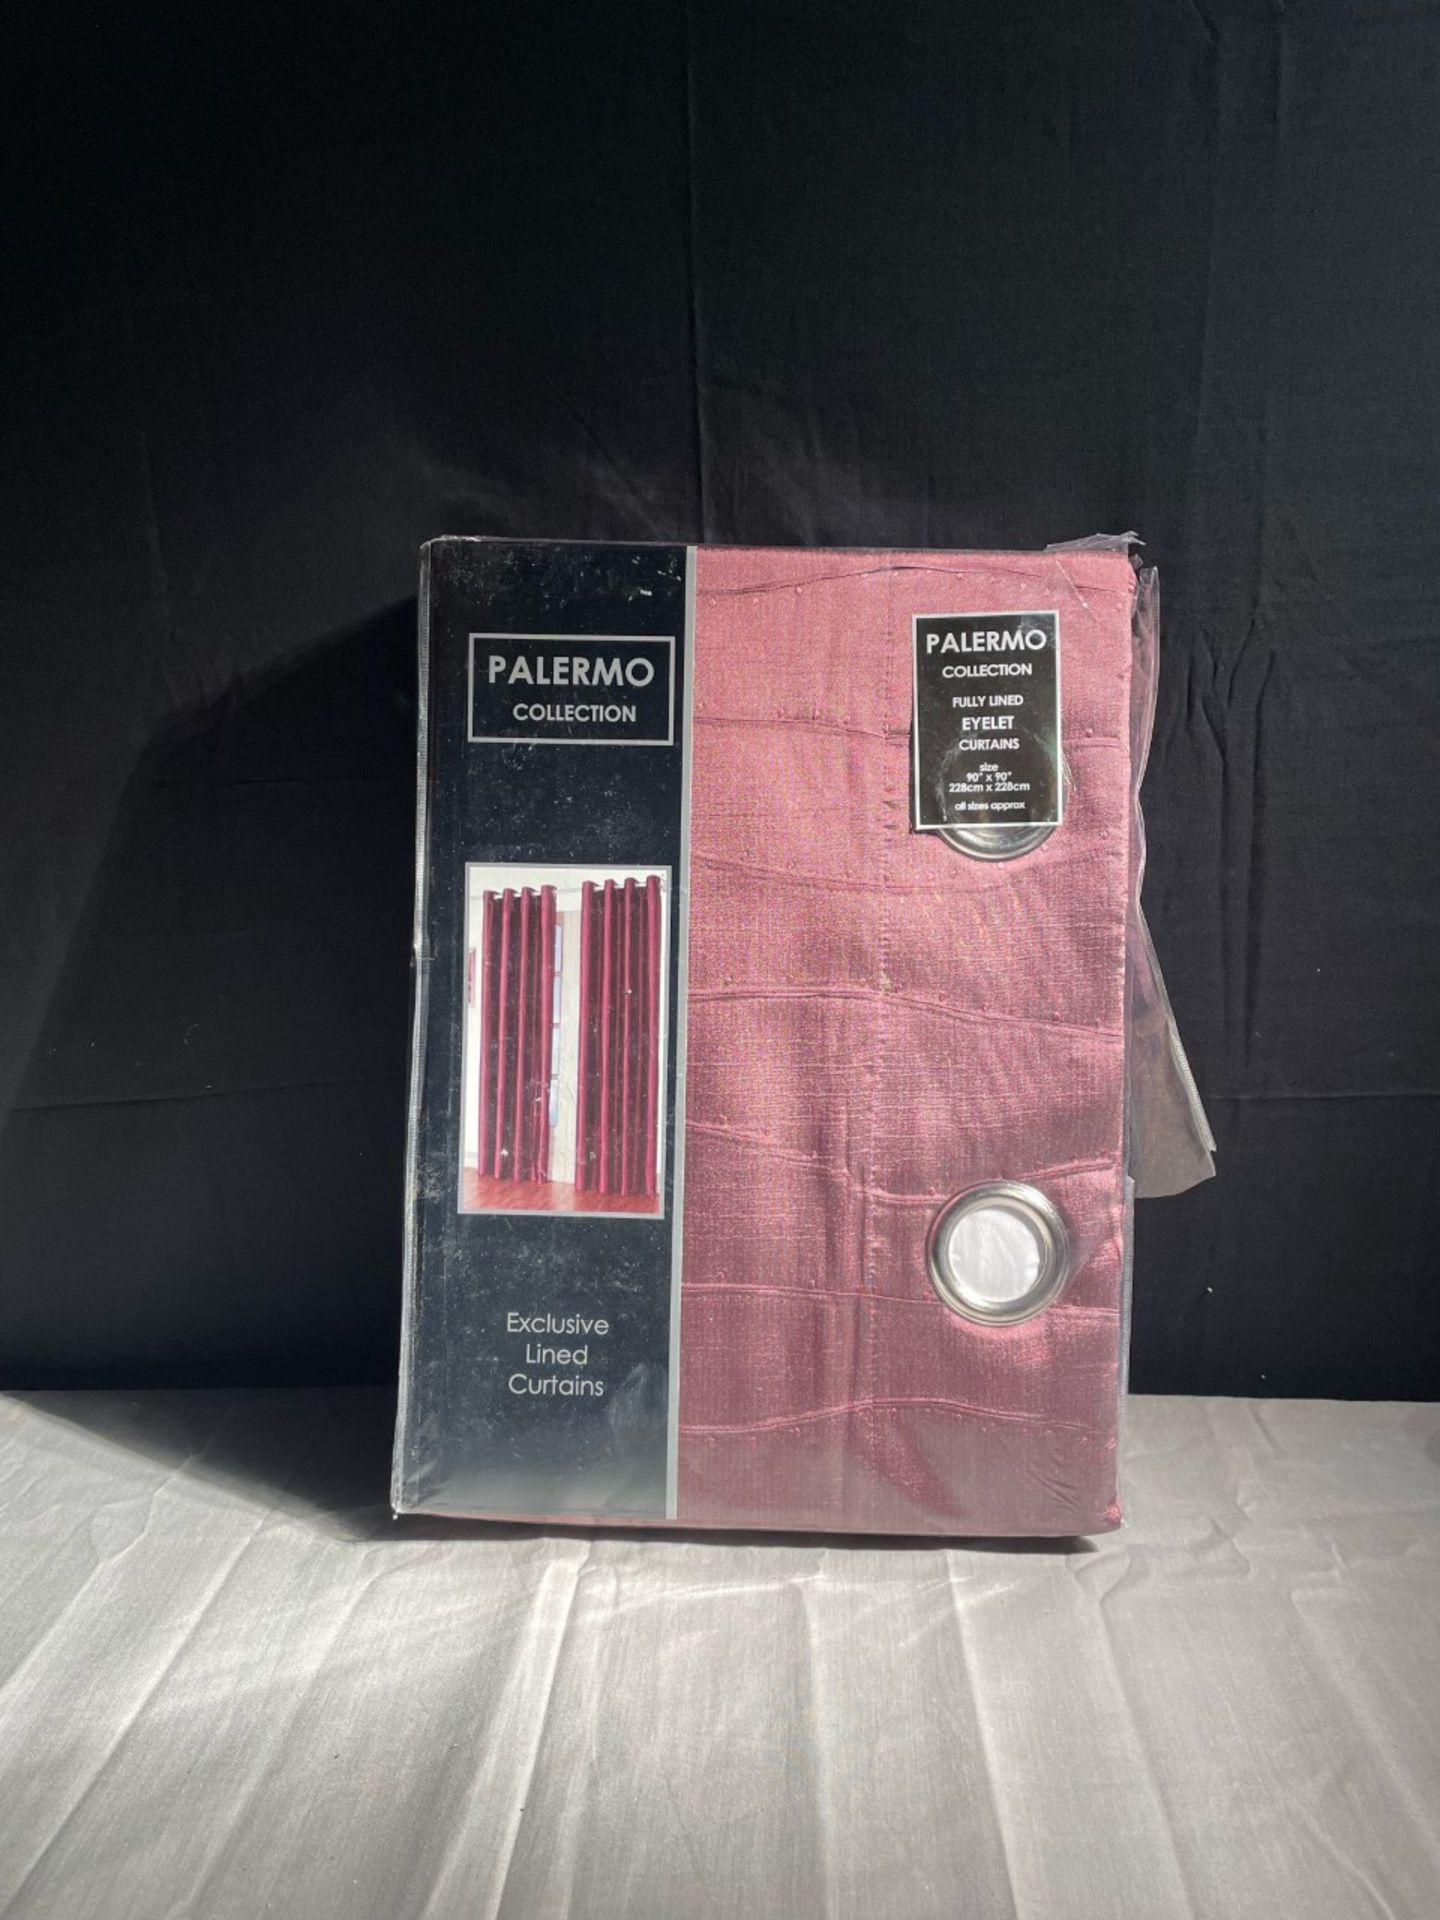 Palermo collection fully lined eyelet curtains. New in packagingSize 90”(228cm) x 90”